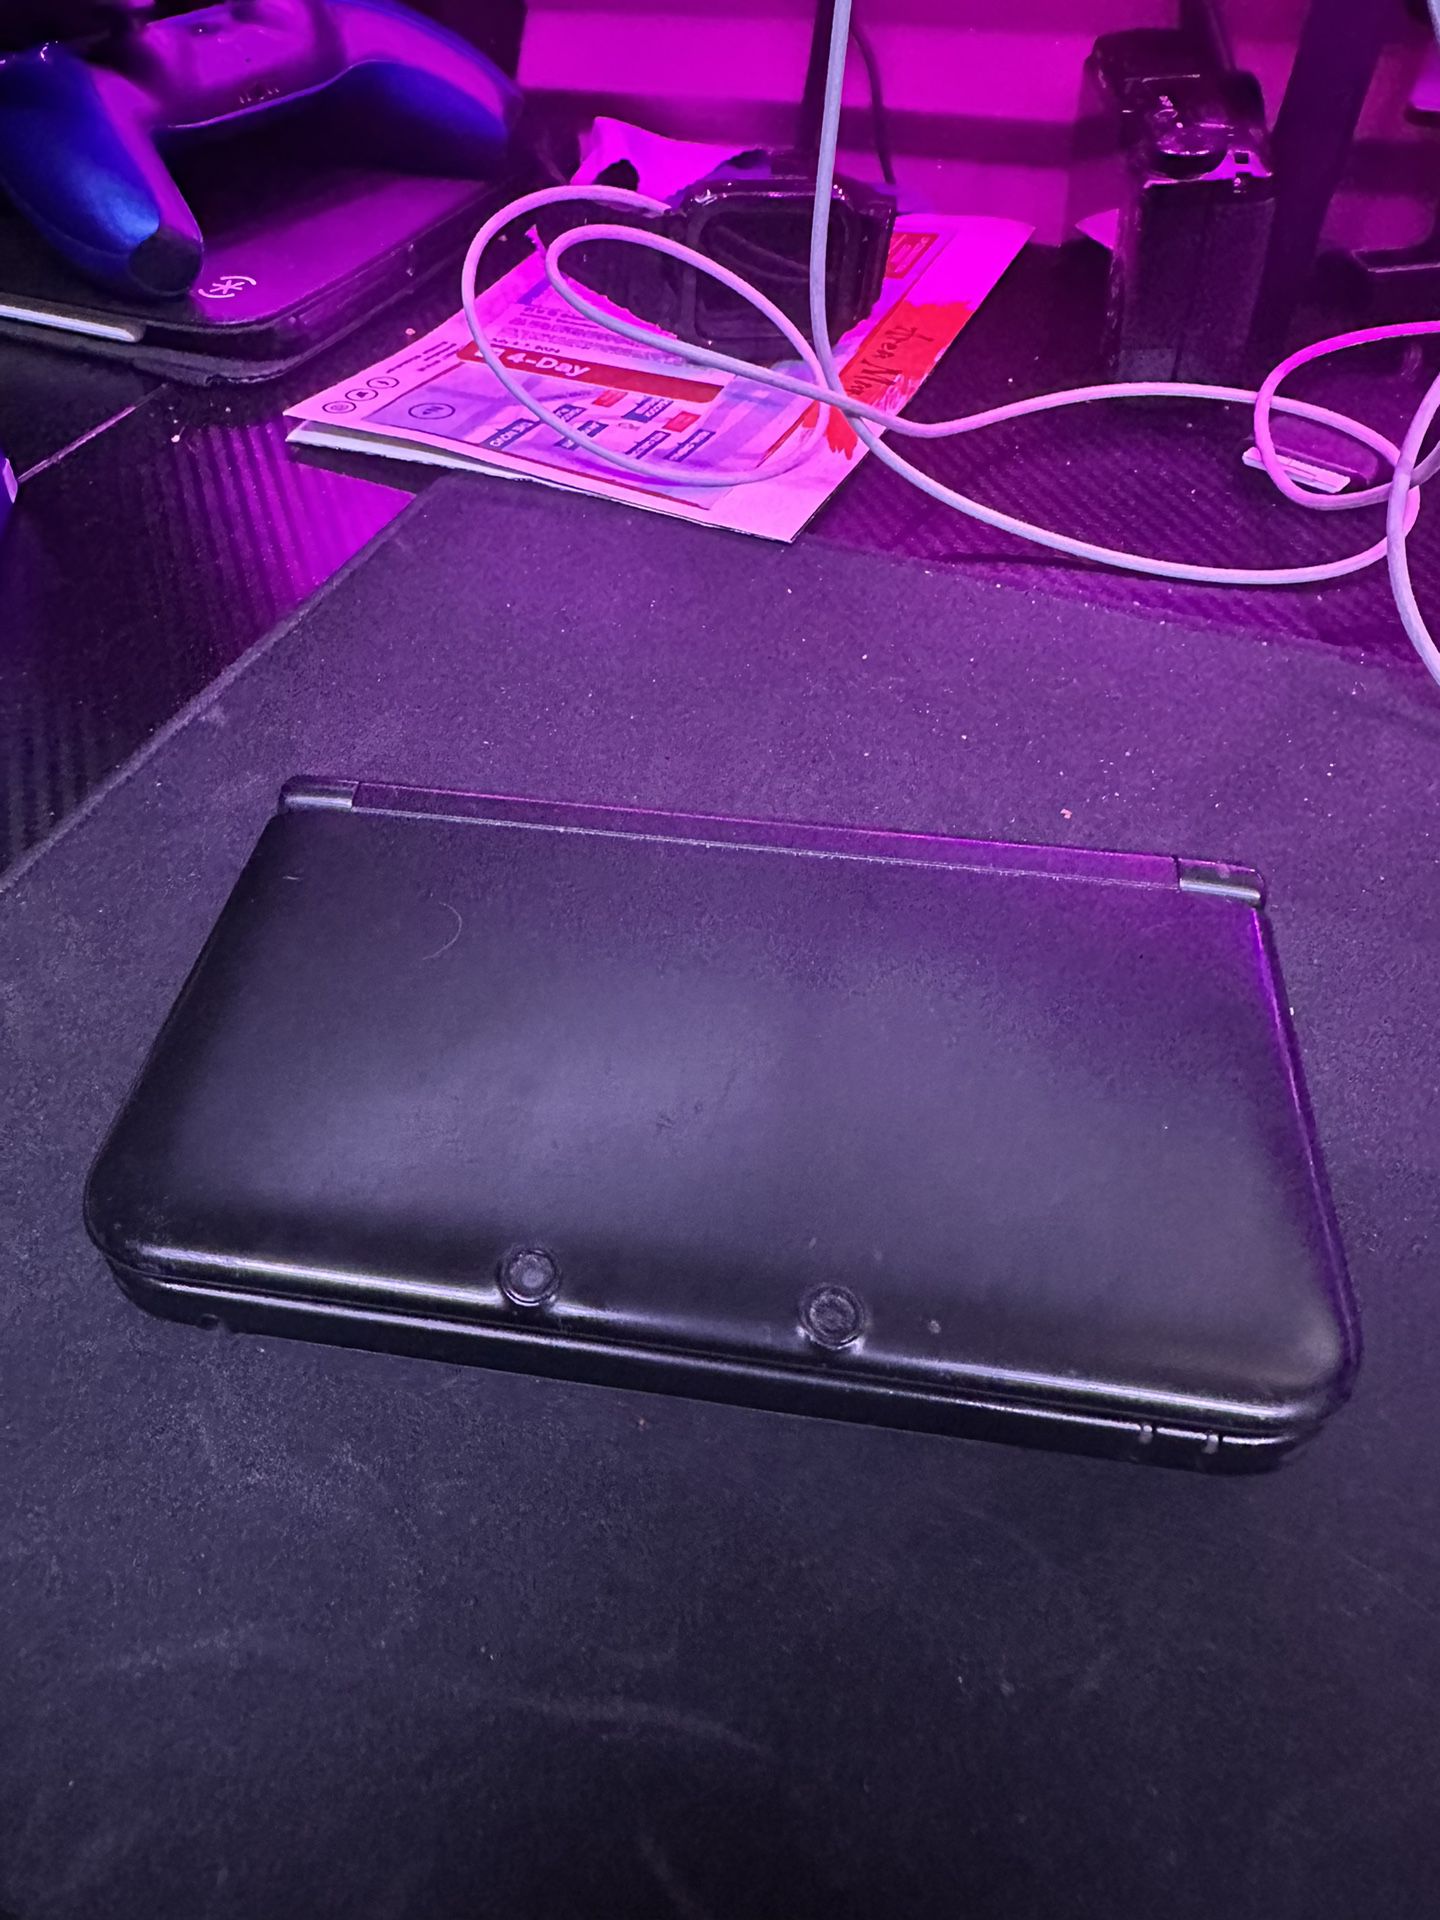 Nintendo 3ds XL (modded) W/ Charger